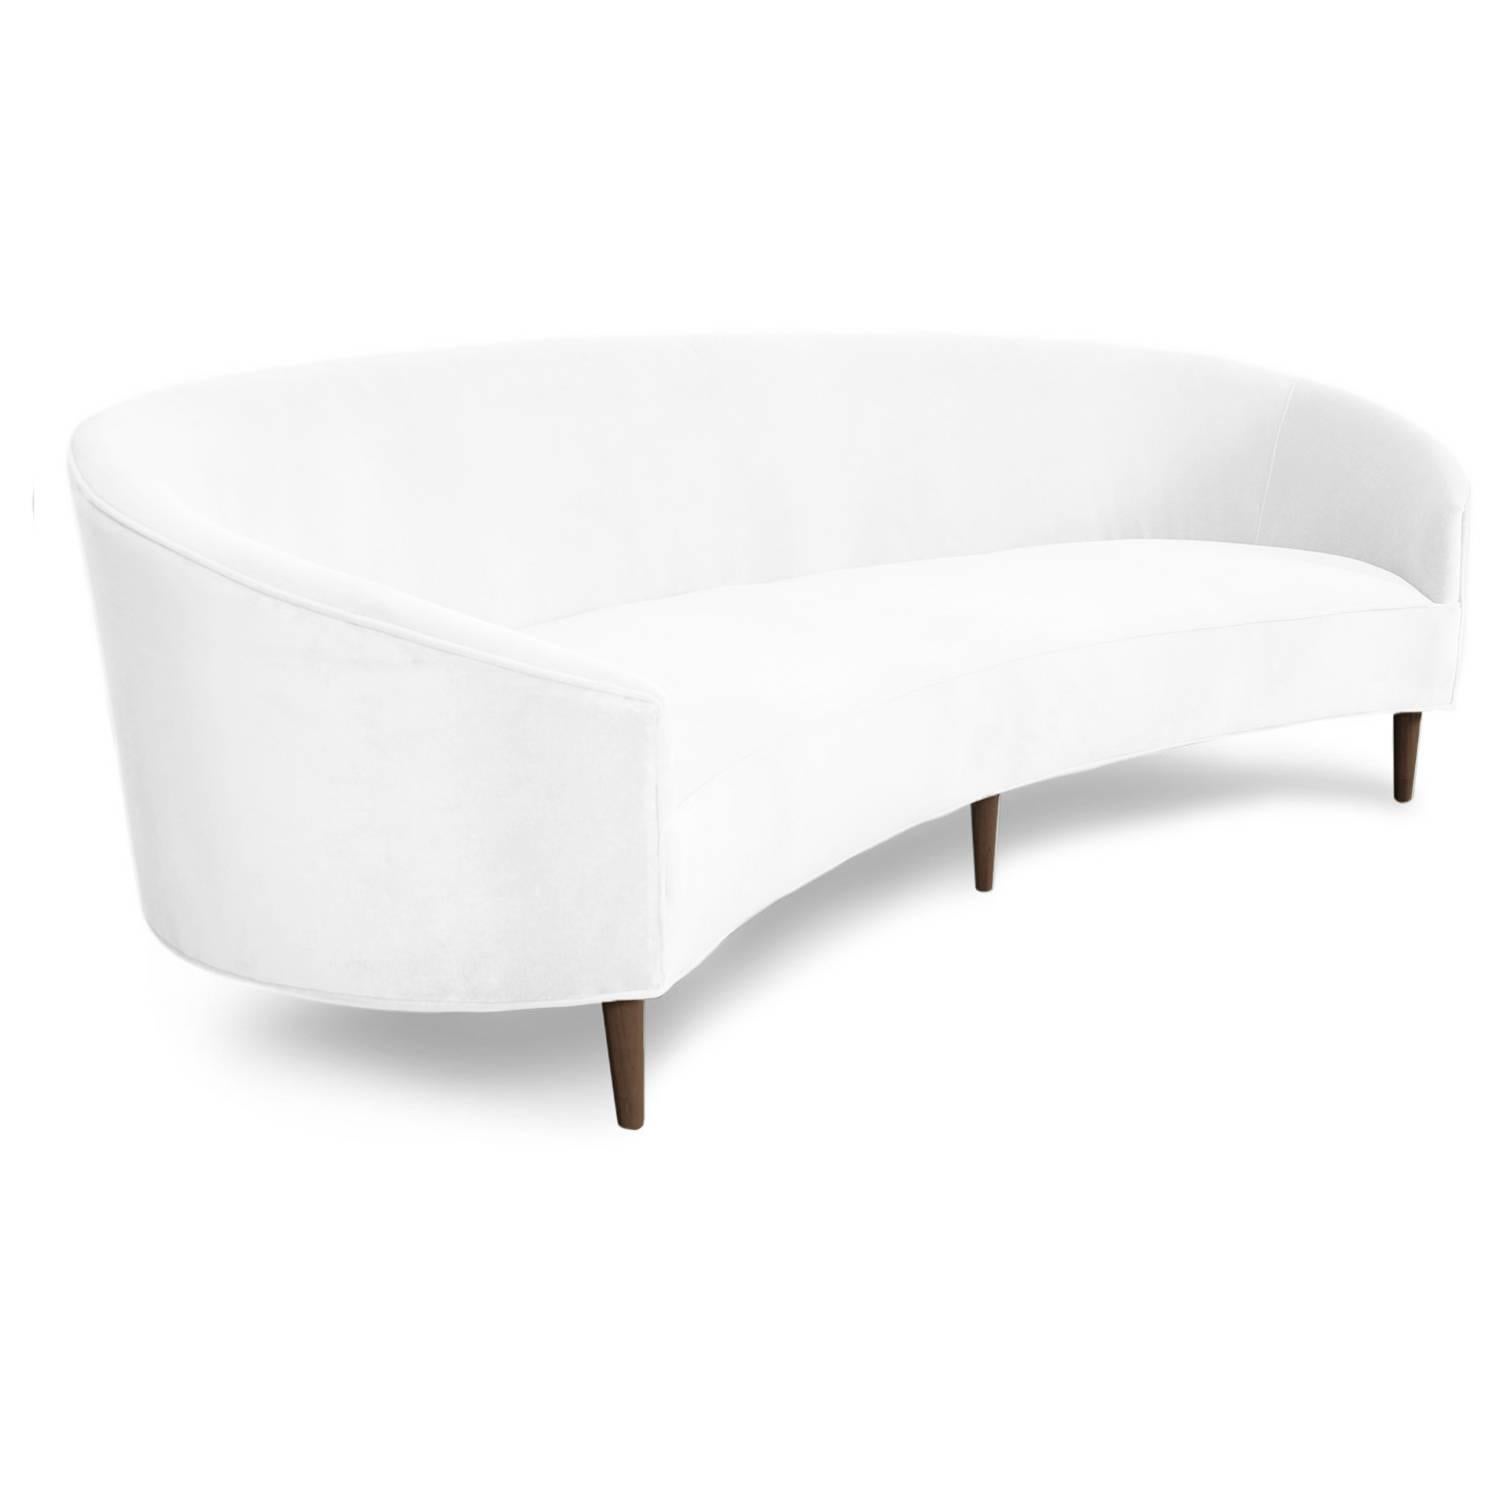 With classic clean lines and sharp curves comes Modshop's Art Deco sofa. Uniquely shaped, similar to a crescent, curved in arms and six walnut cone legs put together in elegance. Shown in snow velvet.

Measures: 105